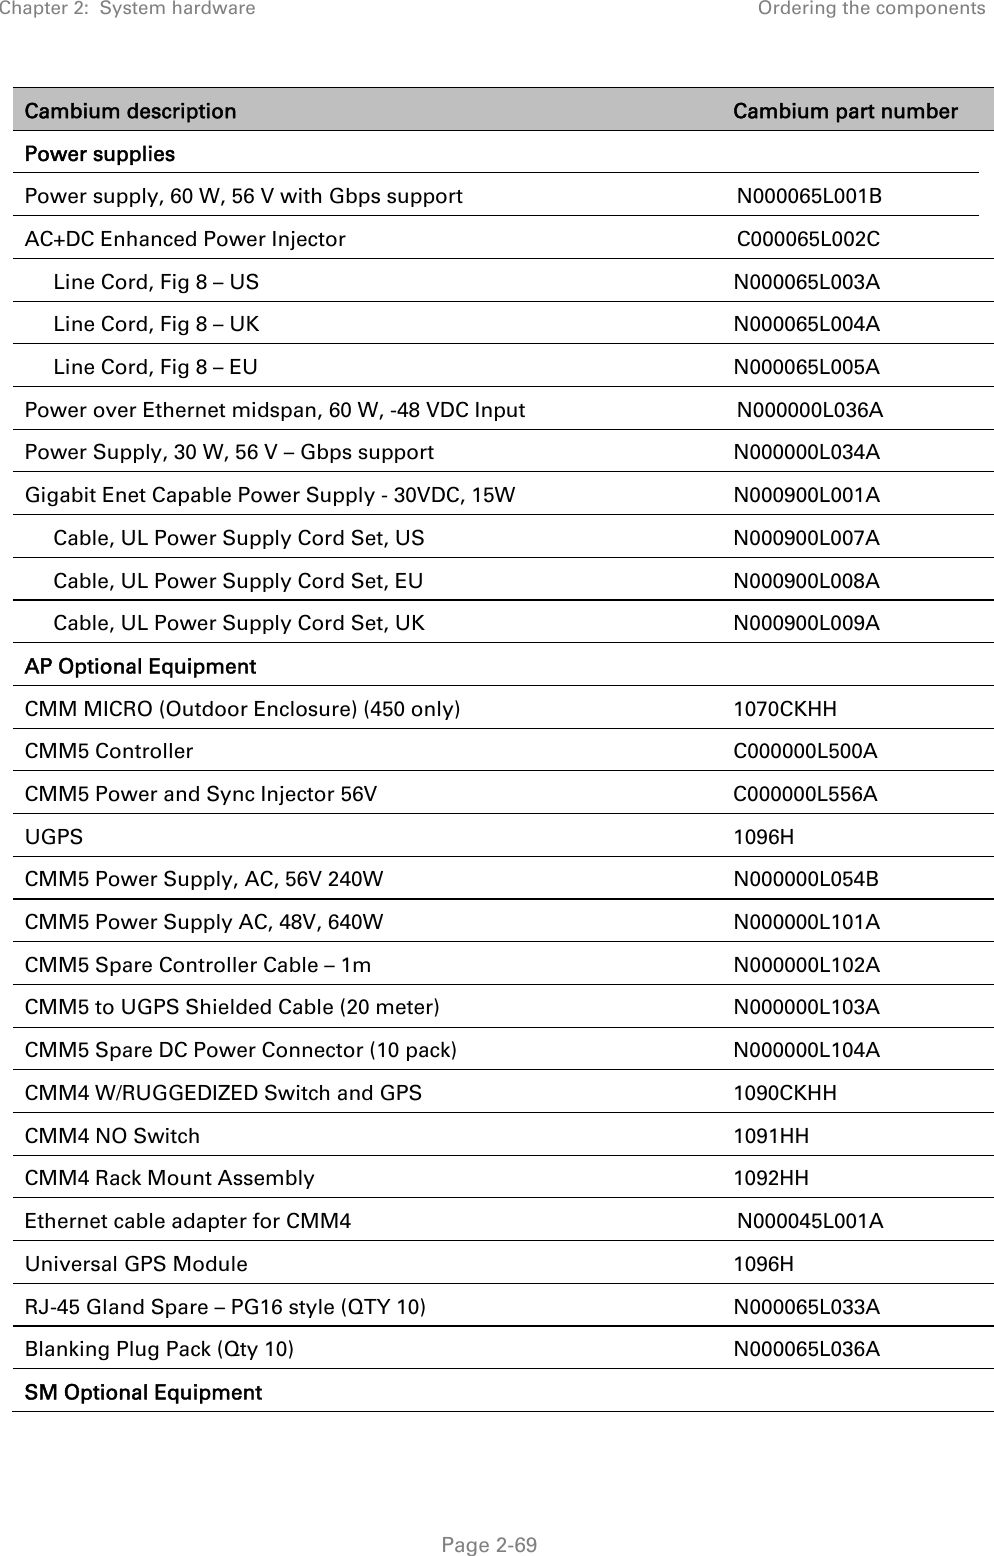 Chapter 2:  System hardware  Ordering the components   Page 2-69 Cambium description  Cambium part number Power supplies   Power supply, 60 W, 56 V with Gbps support  N000065L001B AC+DC Enhanced Power Injector  C000065L002C      Line Cord, Fig 8 – US  N000065L003A      Line Cord, Fig 8 – UK  N000065L004A      Line Cord, Fig 8 – EU  N000065L005A Power over Ethernet midspan, 60 W, -48 VDC Input  N000000L036A Power Supply, 30 W, 56 V – Gbps support N000000L034A Gigabit Enet Capable Power Supply - 30VDC, 15W N000900L001A      Cable, UL Power Supply Cord Set, US  N000900L007A      Cable, UL Power Supply Cord Set, EU  N000900L008A      Cable, UL Power Supply Cord Set, UK  N000900L009A AP Optional Equipment   CMM MICRO (Outdoor Enclosure) (450 only)  1070CKHH CMM5 Controller  C000000L500A CMM5 Power and Sync Injector 56V  C000000L556A UGPS 1096H CMM5 Power Supply, AC, 56V 240W  N000000L054B CMM5 Power Supply AC, 48V, 640W  N000000L101A CMM5 Spare Controller Cable – 1m  N000000L102A CMM5 to UGPS Shielded Cable (20 meter)  N000000L103A CMM5 Spare DC Power Connector (10 pack)  N000000L104A CMM4 W/RUGGEDIZED Switch and GPS  1090CKHH CMM4 NO Switch  1091HH CMM4 Rack Mount Assembly  1092HH Ethernet cable adapter for CMM4  N000045L001A Universal GPS Module  1096H RJ-45 Gland Spare – PG16 style (QTY 10)  N000065L033A Blanking Plug Pack (Qty 10)  N000065L036A SM Optional Equipment   